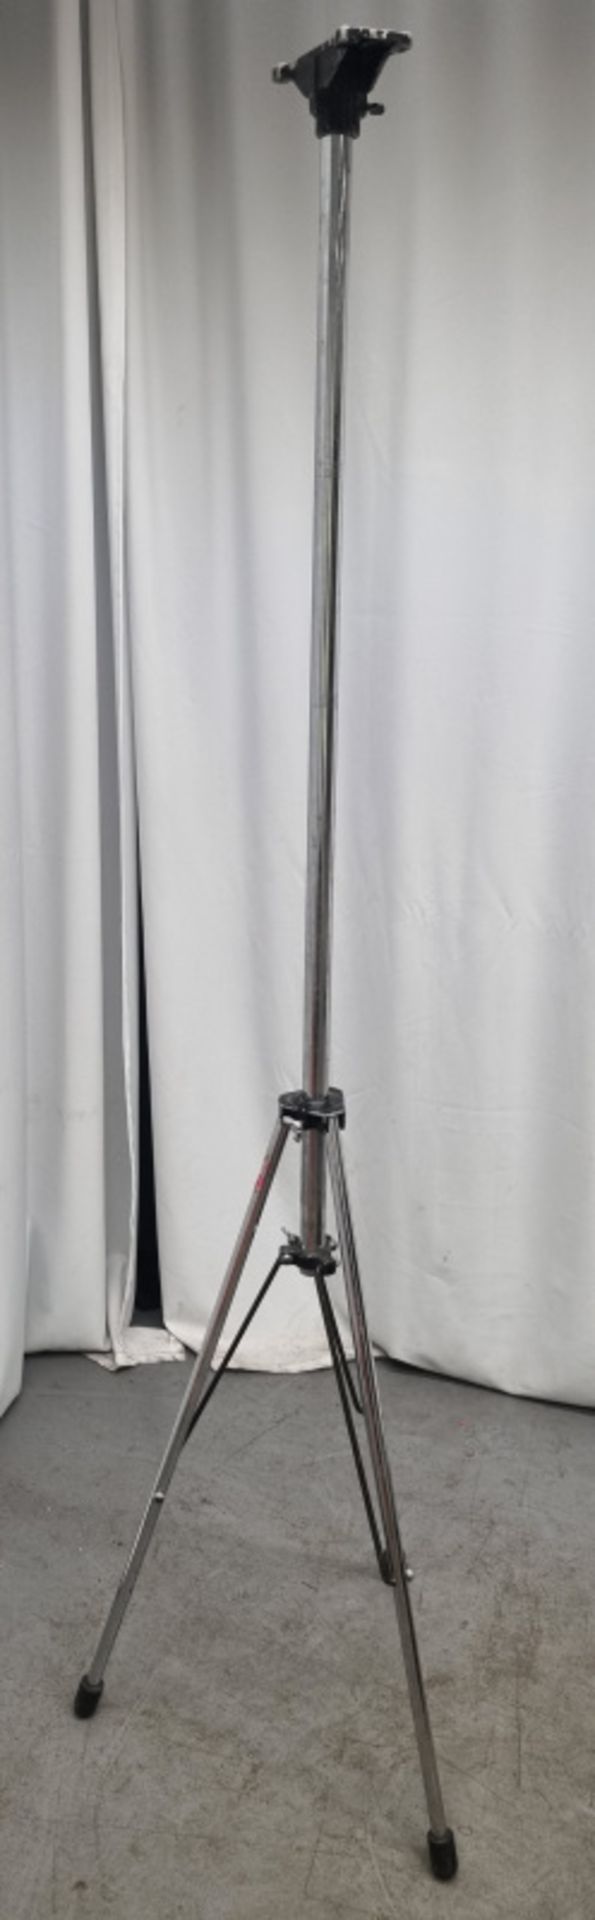 12x Powerdrive Chrome Speaker Stands - non extended height 135cm - Image 2 of 4